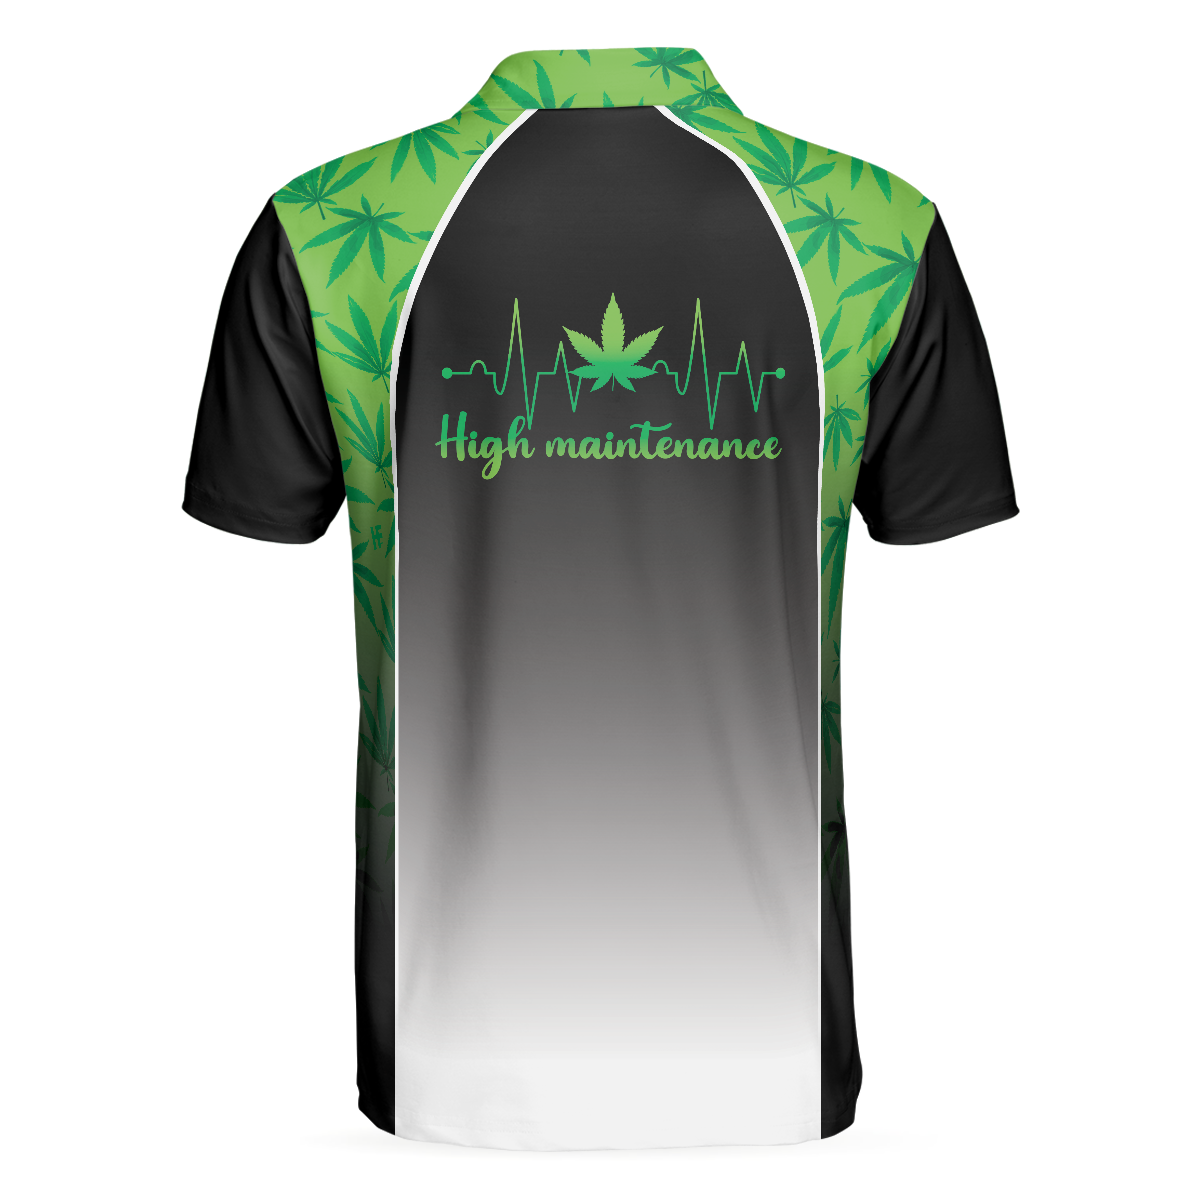 High Maintenance Weed Polo Shirt Green Weed Polo Shirt For Men Black Tie Dye Weed Pattern Shirt Design - 2